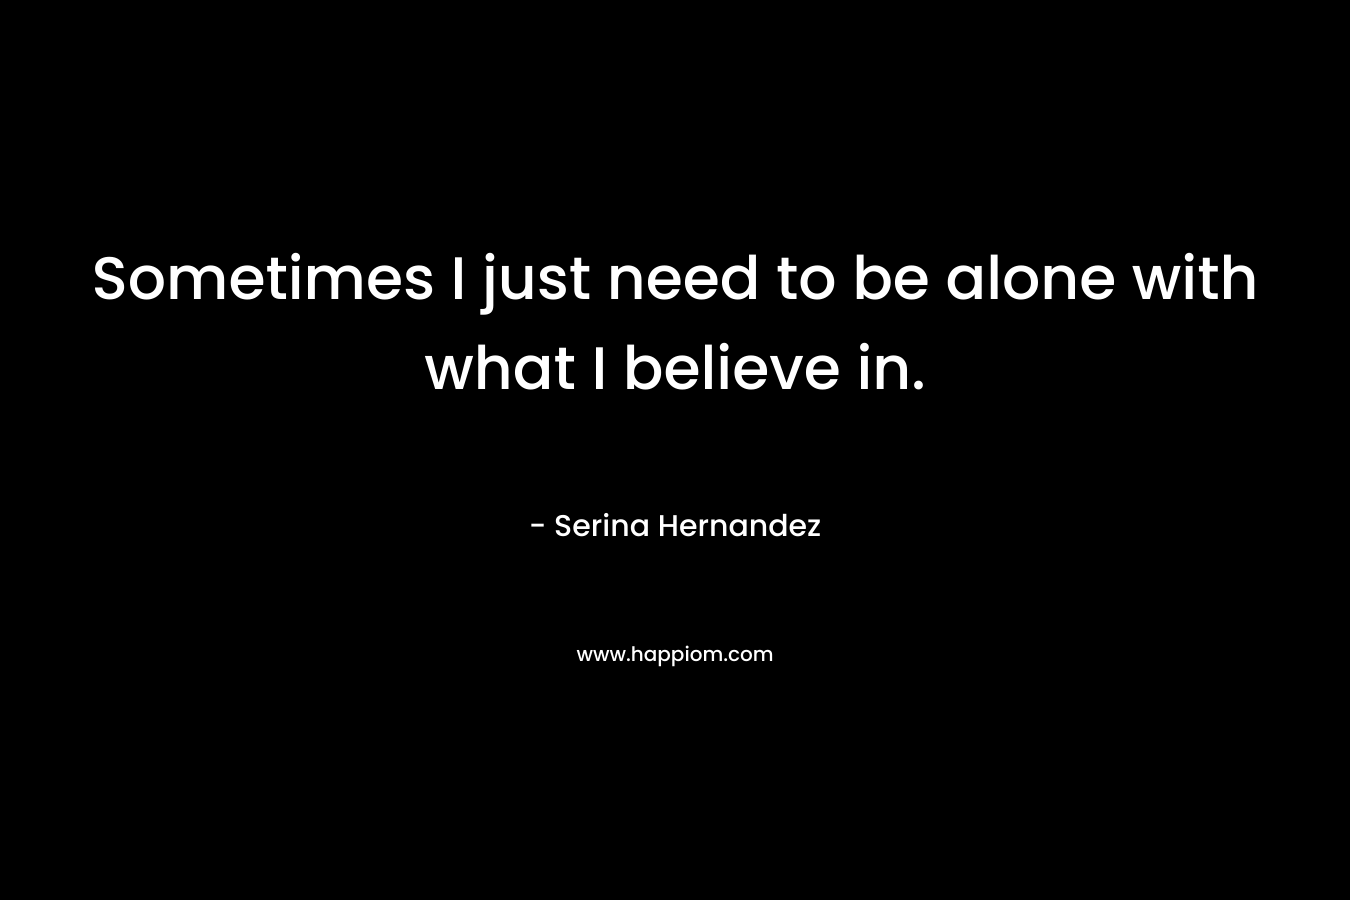 Sometimes I just need to be alone with what I believe in.